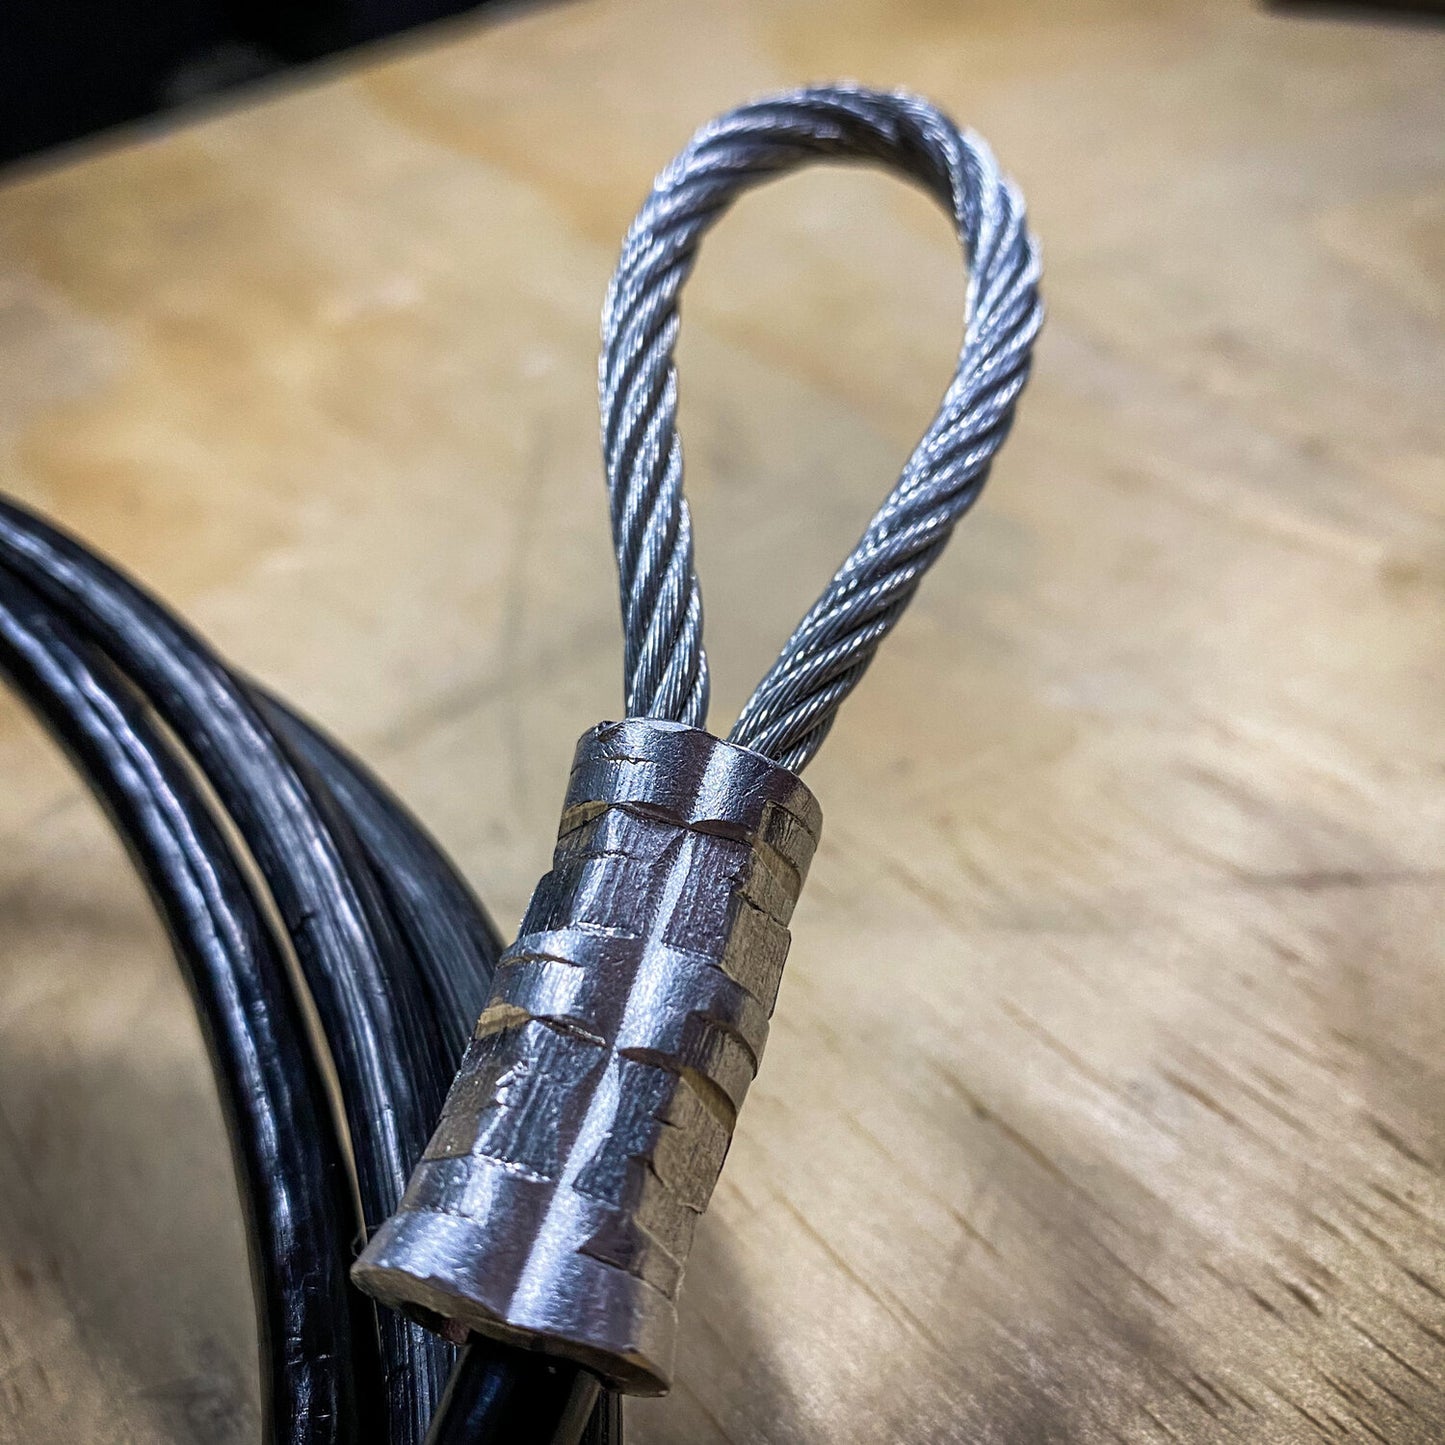 Custom Length Cable (Up to 10ft)